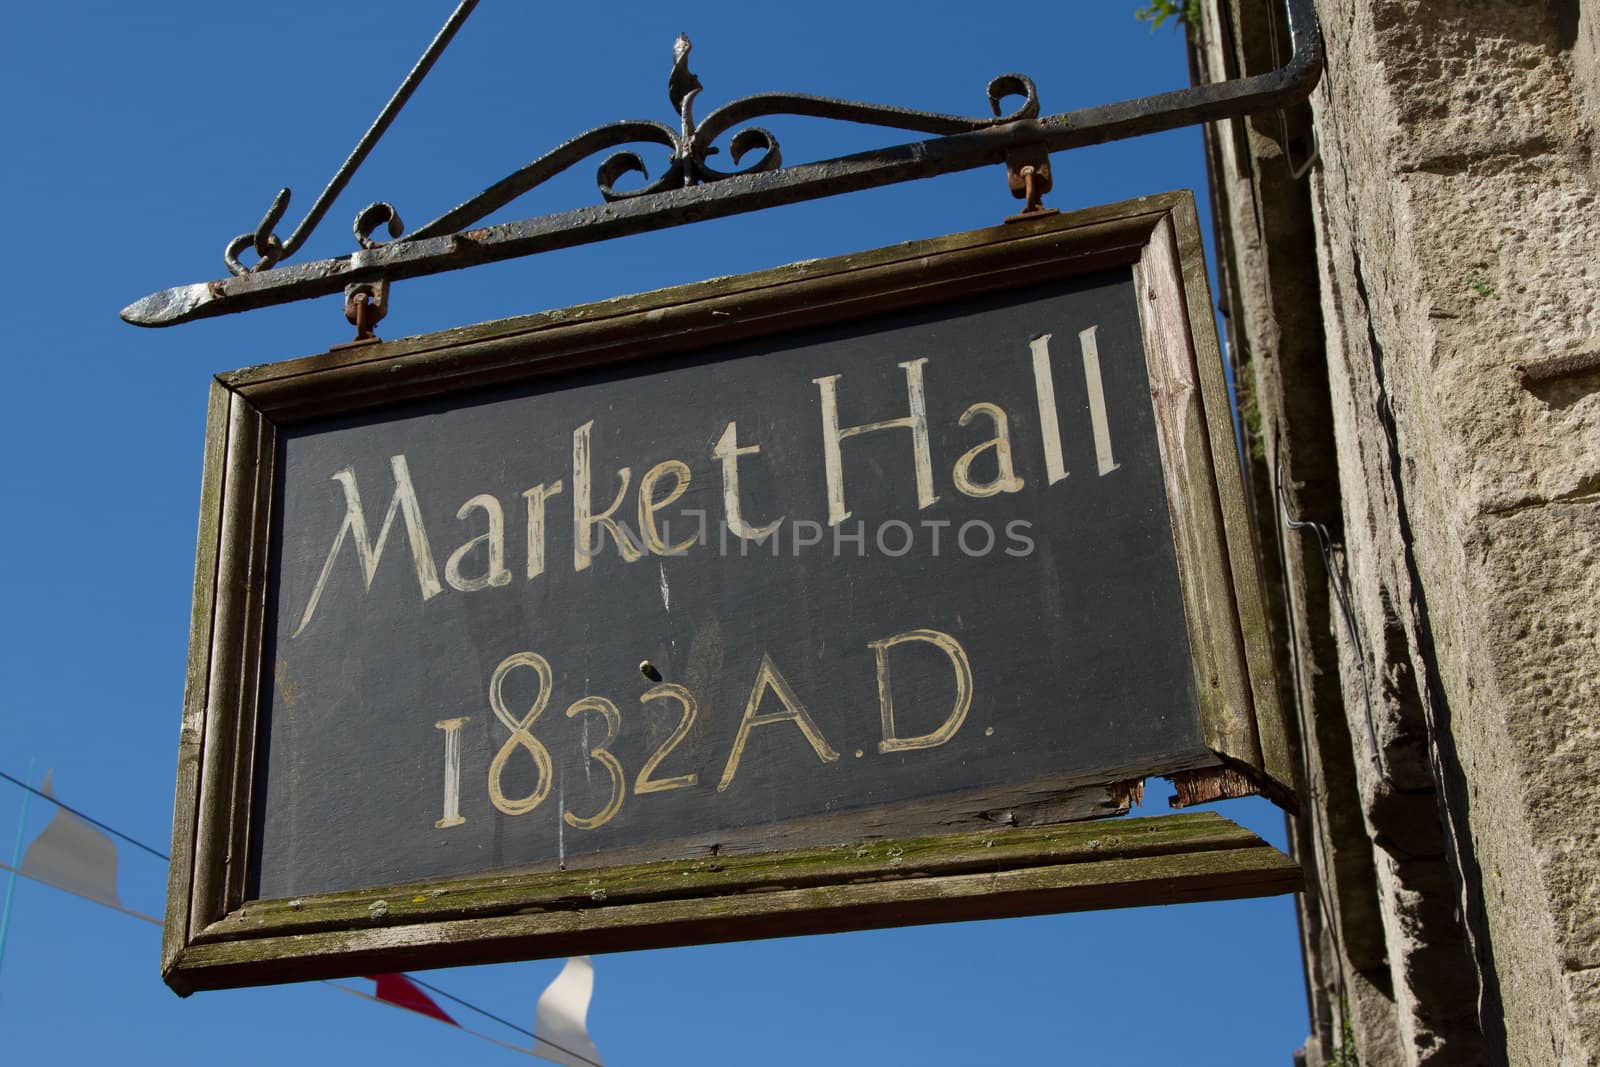 An old sign with a black board with the words 'MARKET HALL 1832 A.D.' hanging on a metal support by a broken wooden frame against a blue sky.